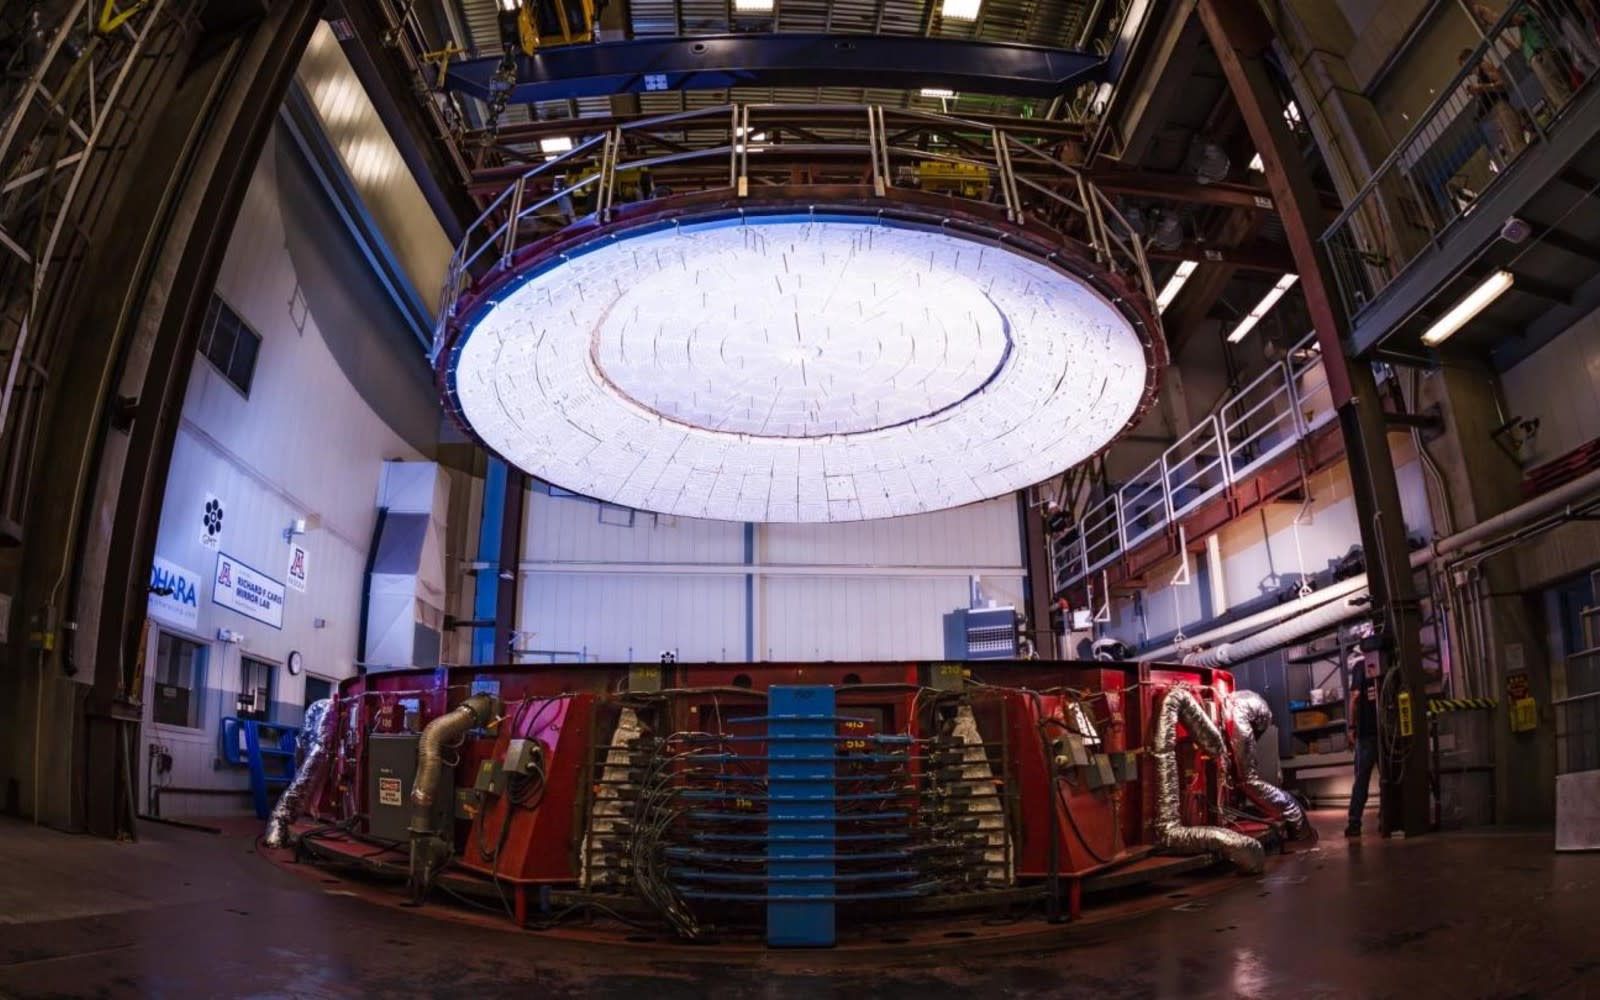 The world’s largest telescope is edging closer to completion